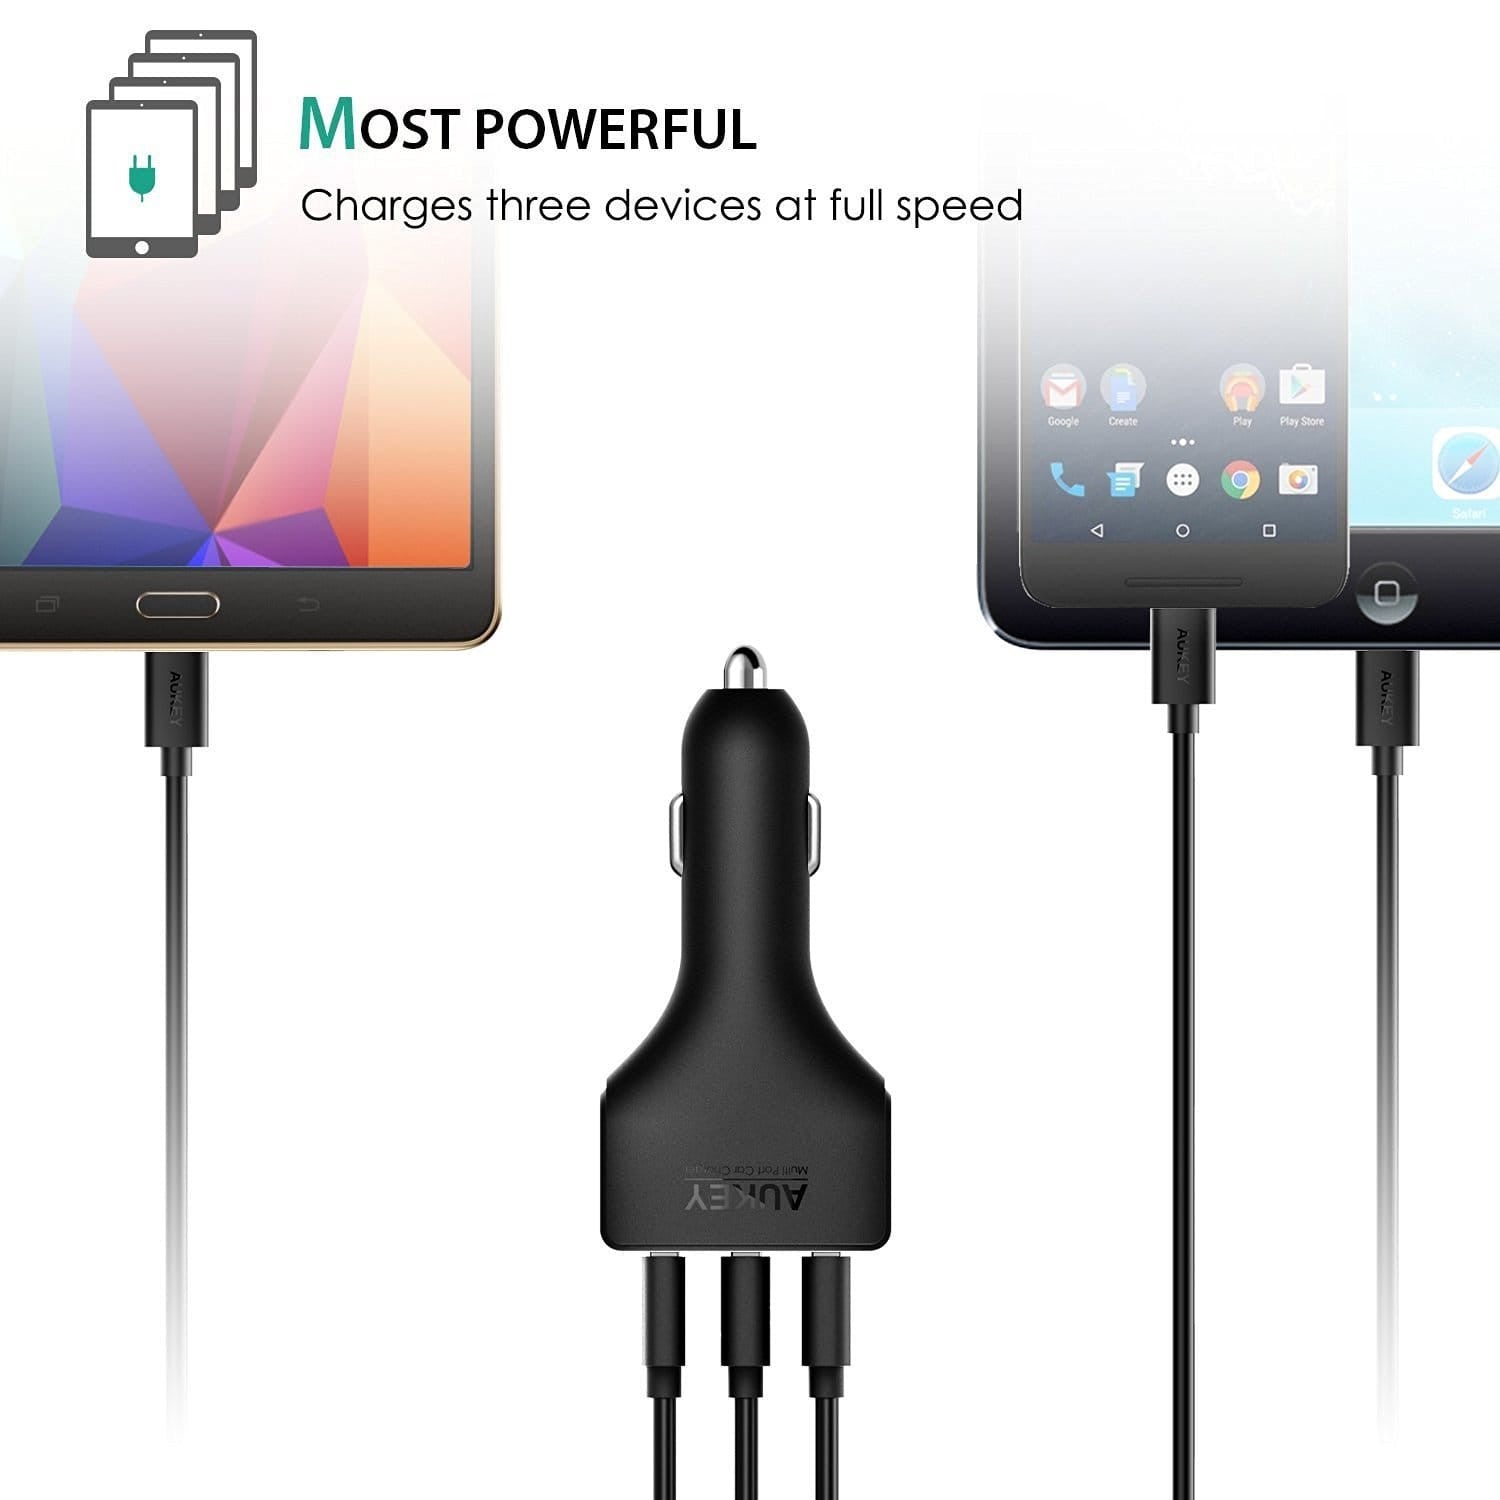 AUKEY CC-Y3 49.5W 10A AiPOWER Quick Charge 3.0 USB C Car Charger - Aukey Malaysia Official Store